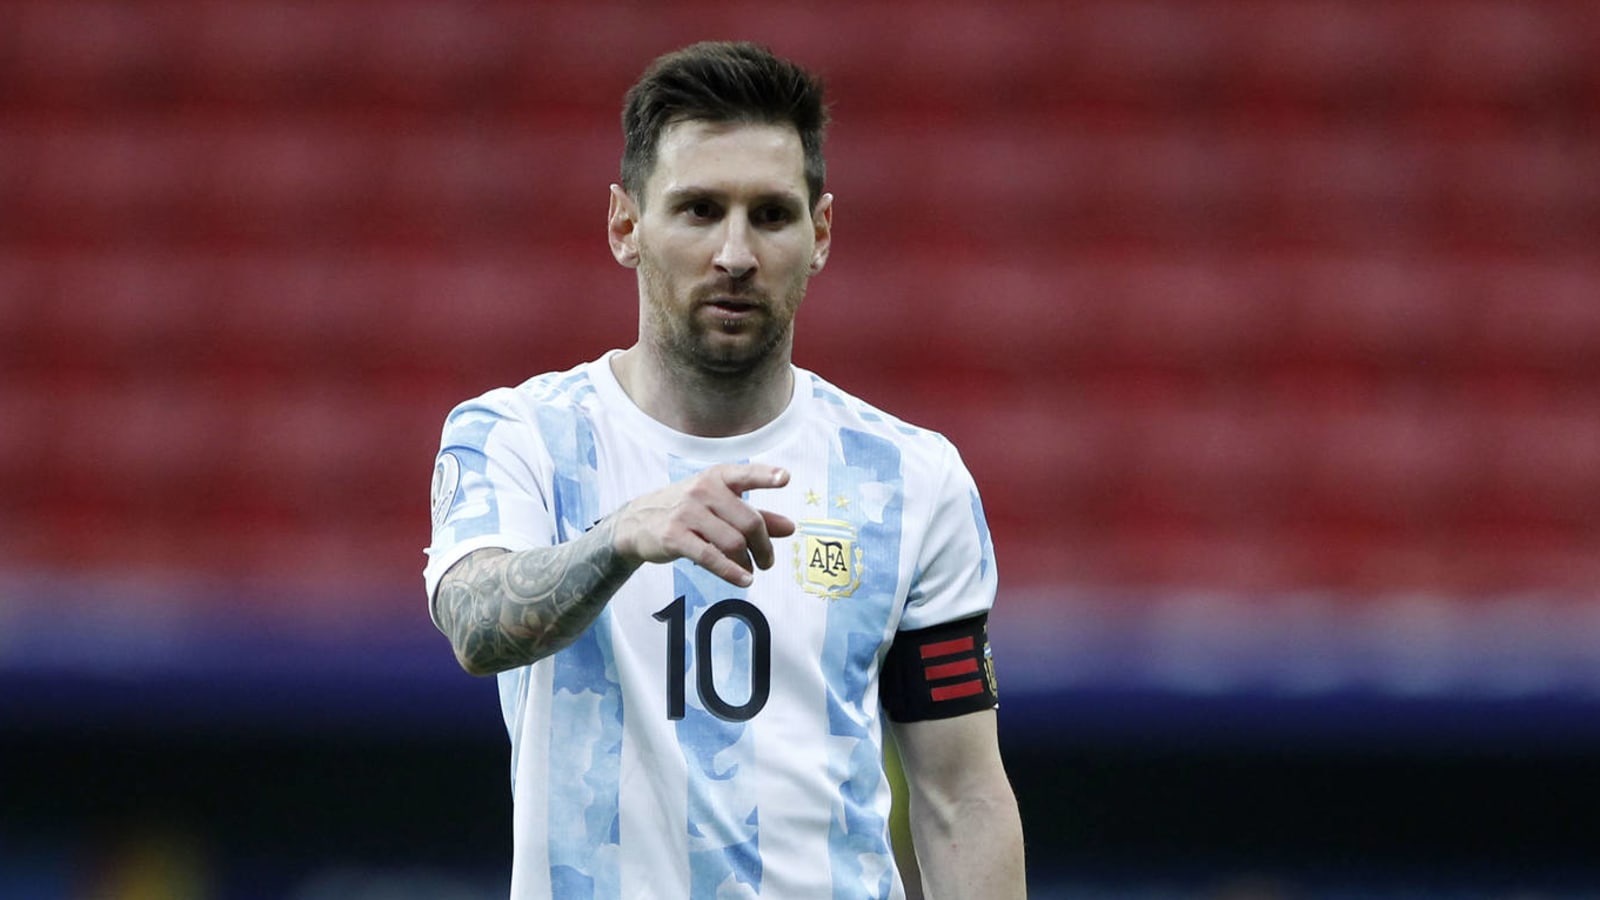 Messi becomes free agent amid Barca contract rumors